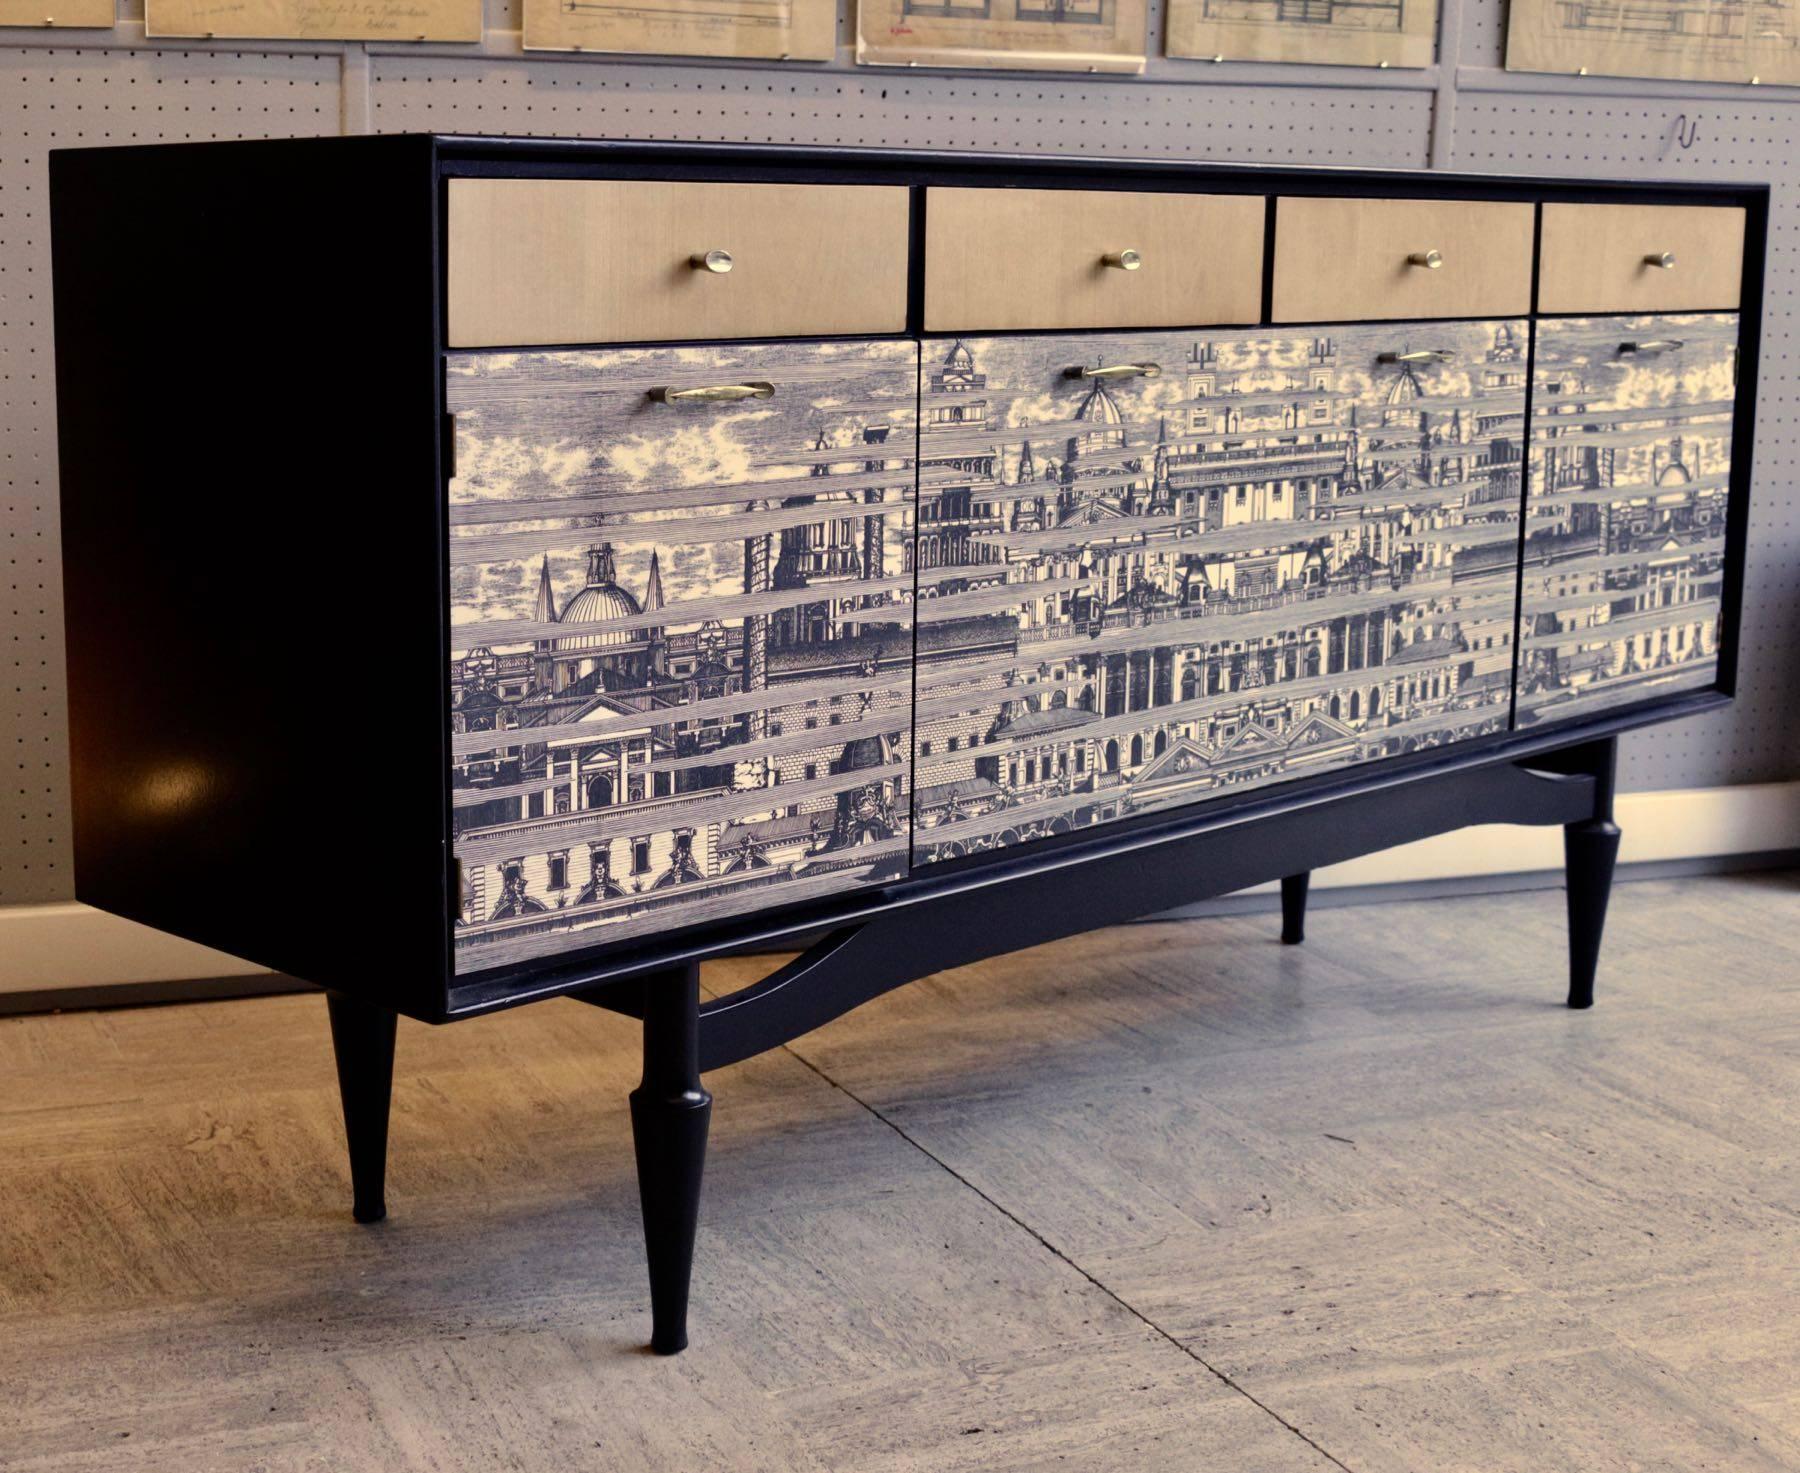 Spectacular revamped 1950s sideboard in the taste of Fornasetti.
Elegant sideboard from the 1950s, with Fornasetti style design applied on doors. (Customized recently).
Drawers are in fruitwood.
It is in the style of Fornasetti, not by